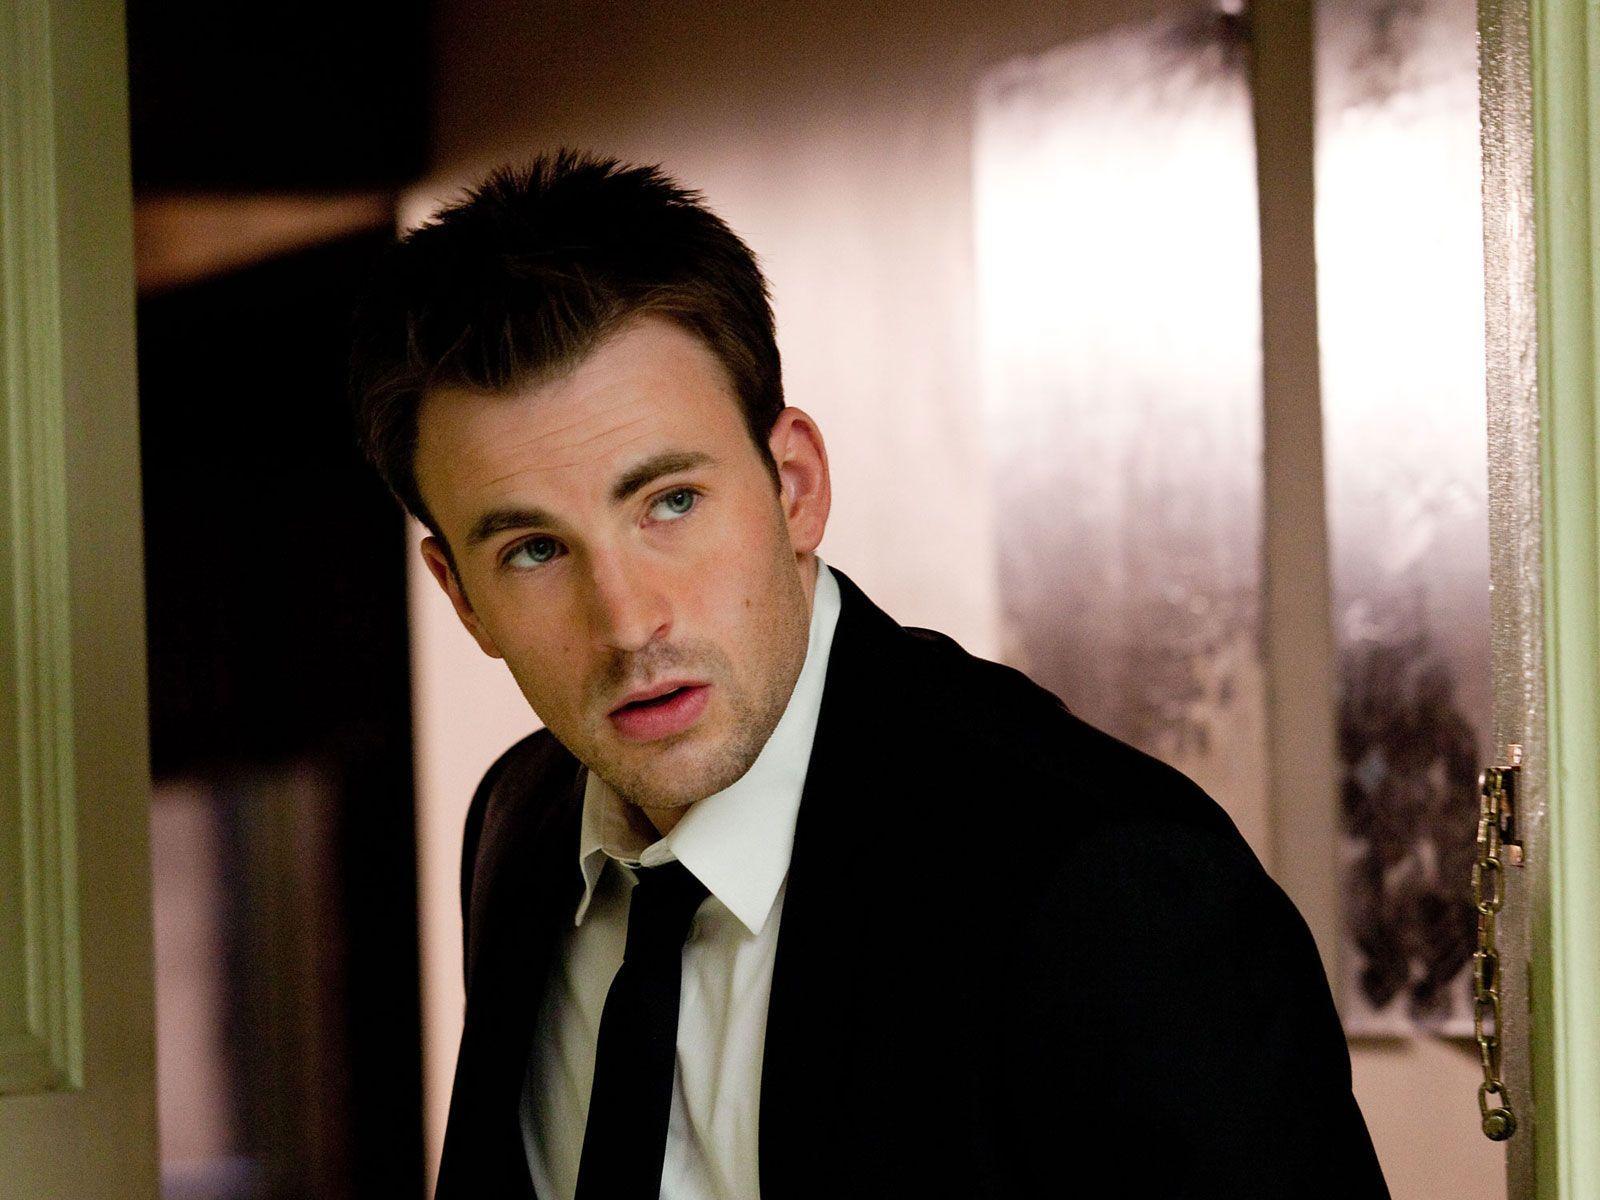 Chris Evans Wallpaper High Resolution and Quality Download